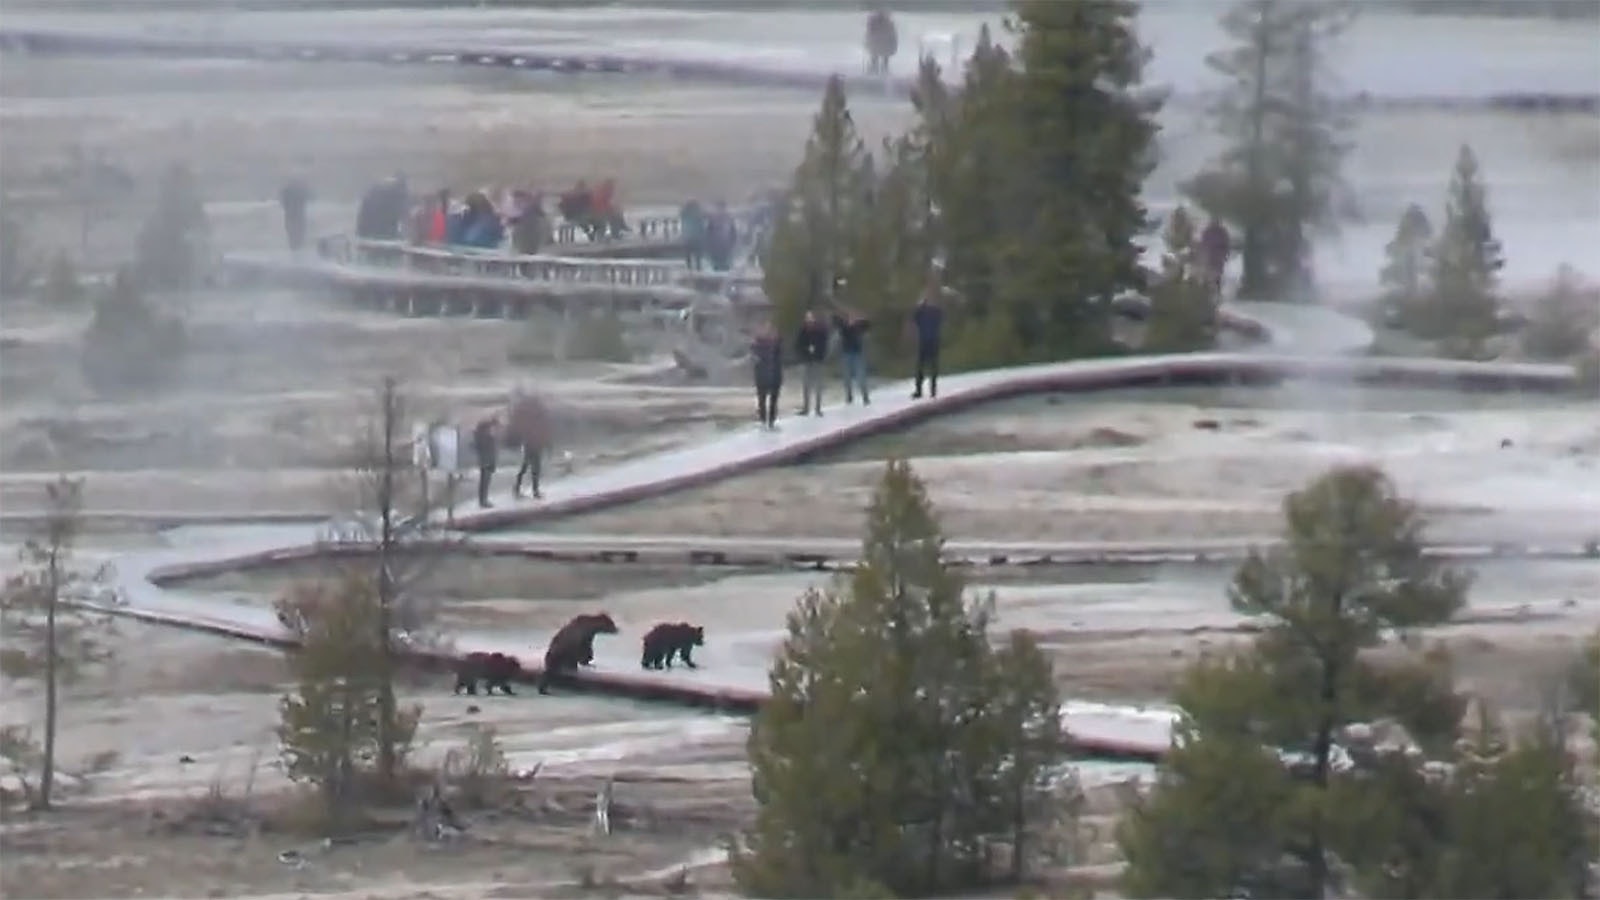 A mother grizzly and her two cubs took a stroll through the Upper Geyser Basin near Old Faithful on Tuesday near crowds of Yellowstone tourist who — shockingly — remained well-behaved around the bears.